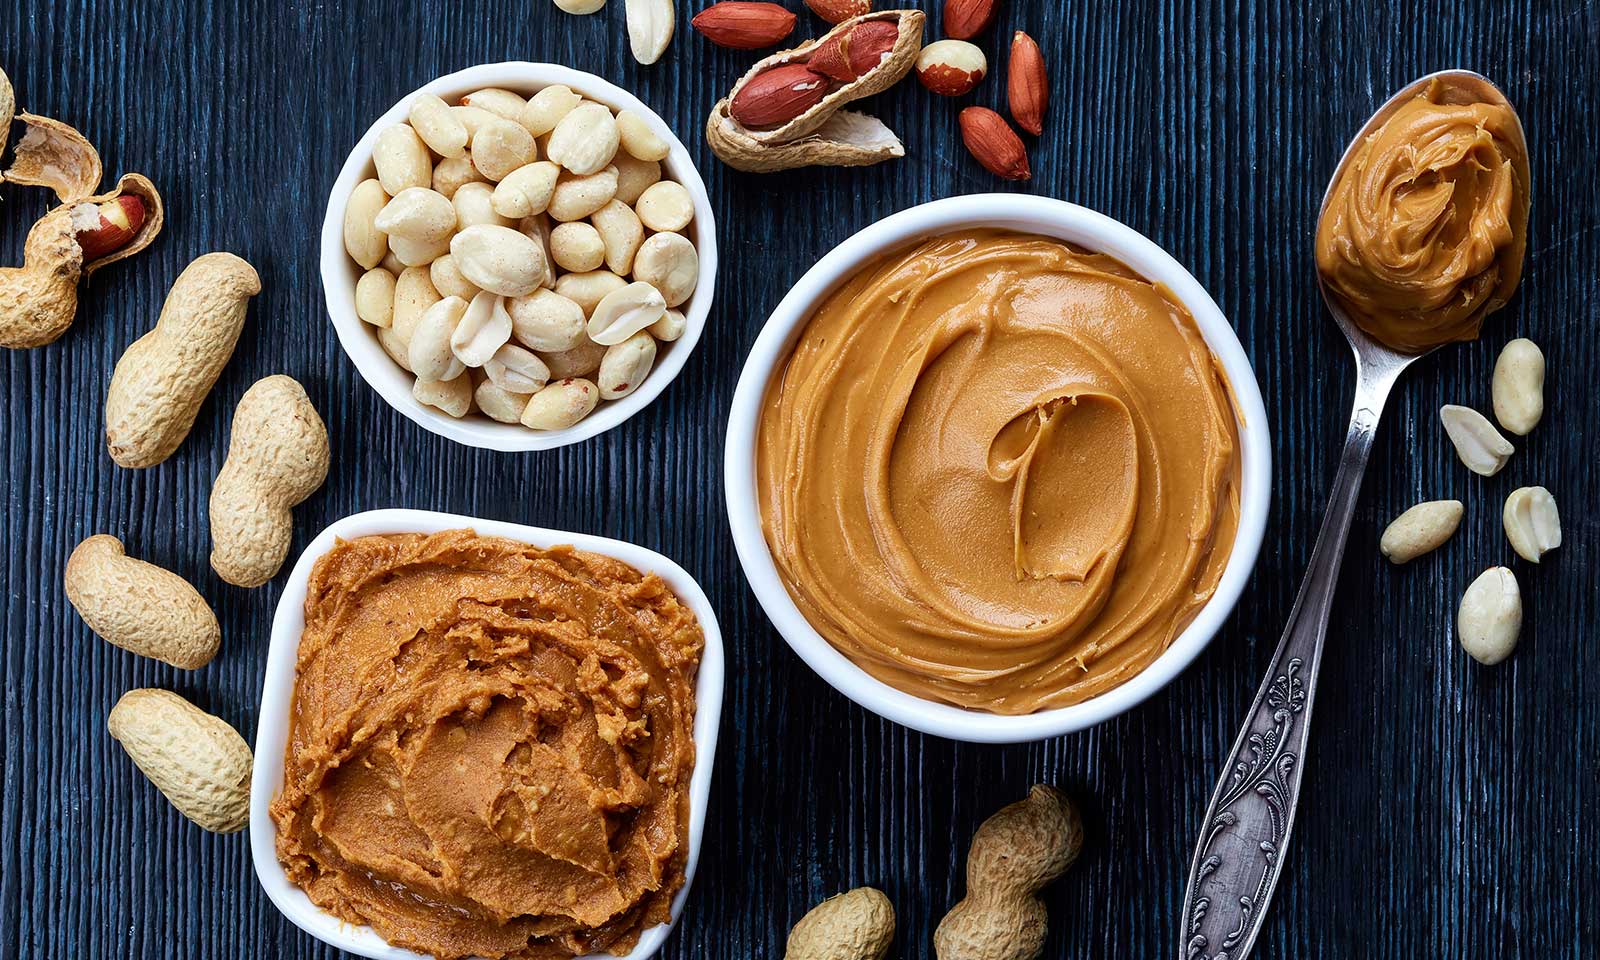 6 Reasons To Eat More Natural Peanut Butter